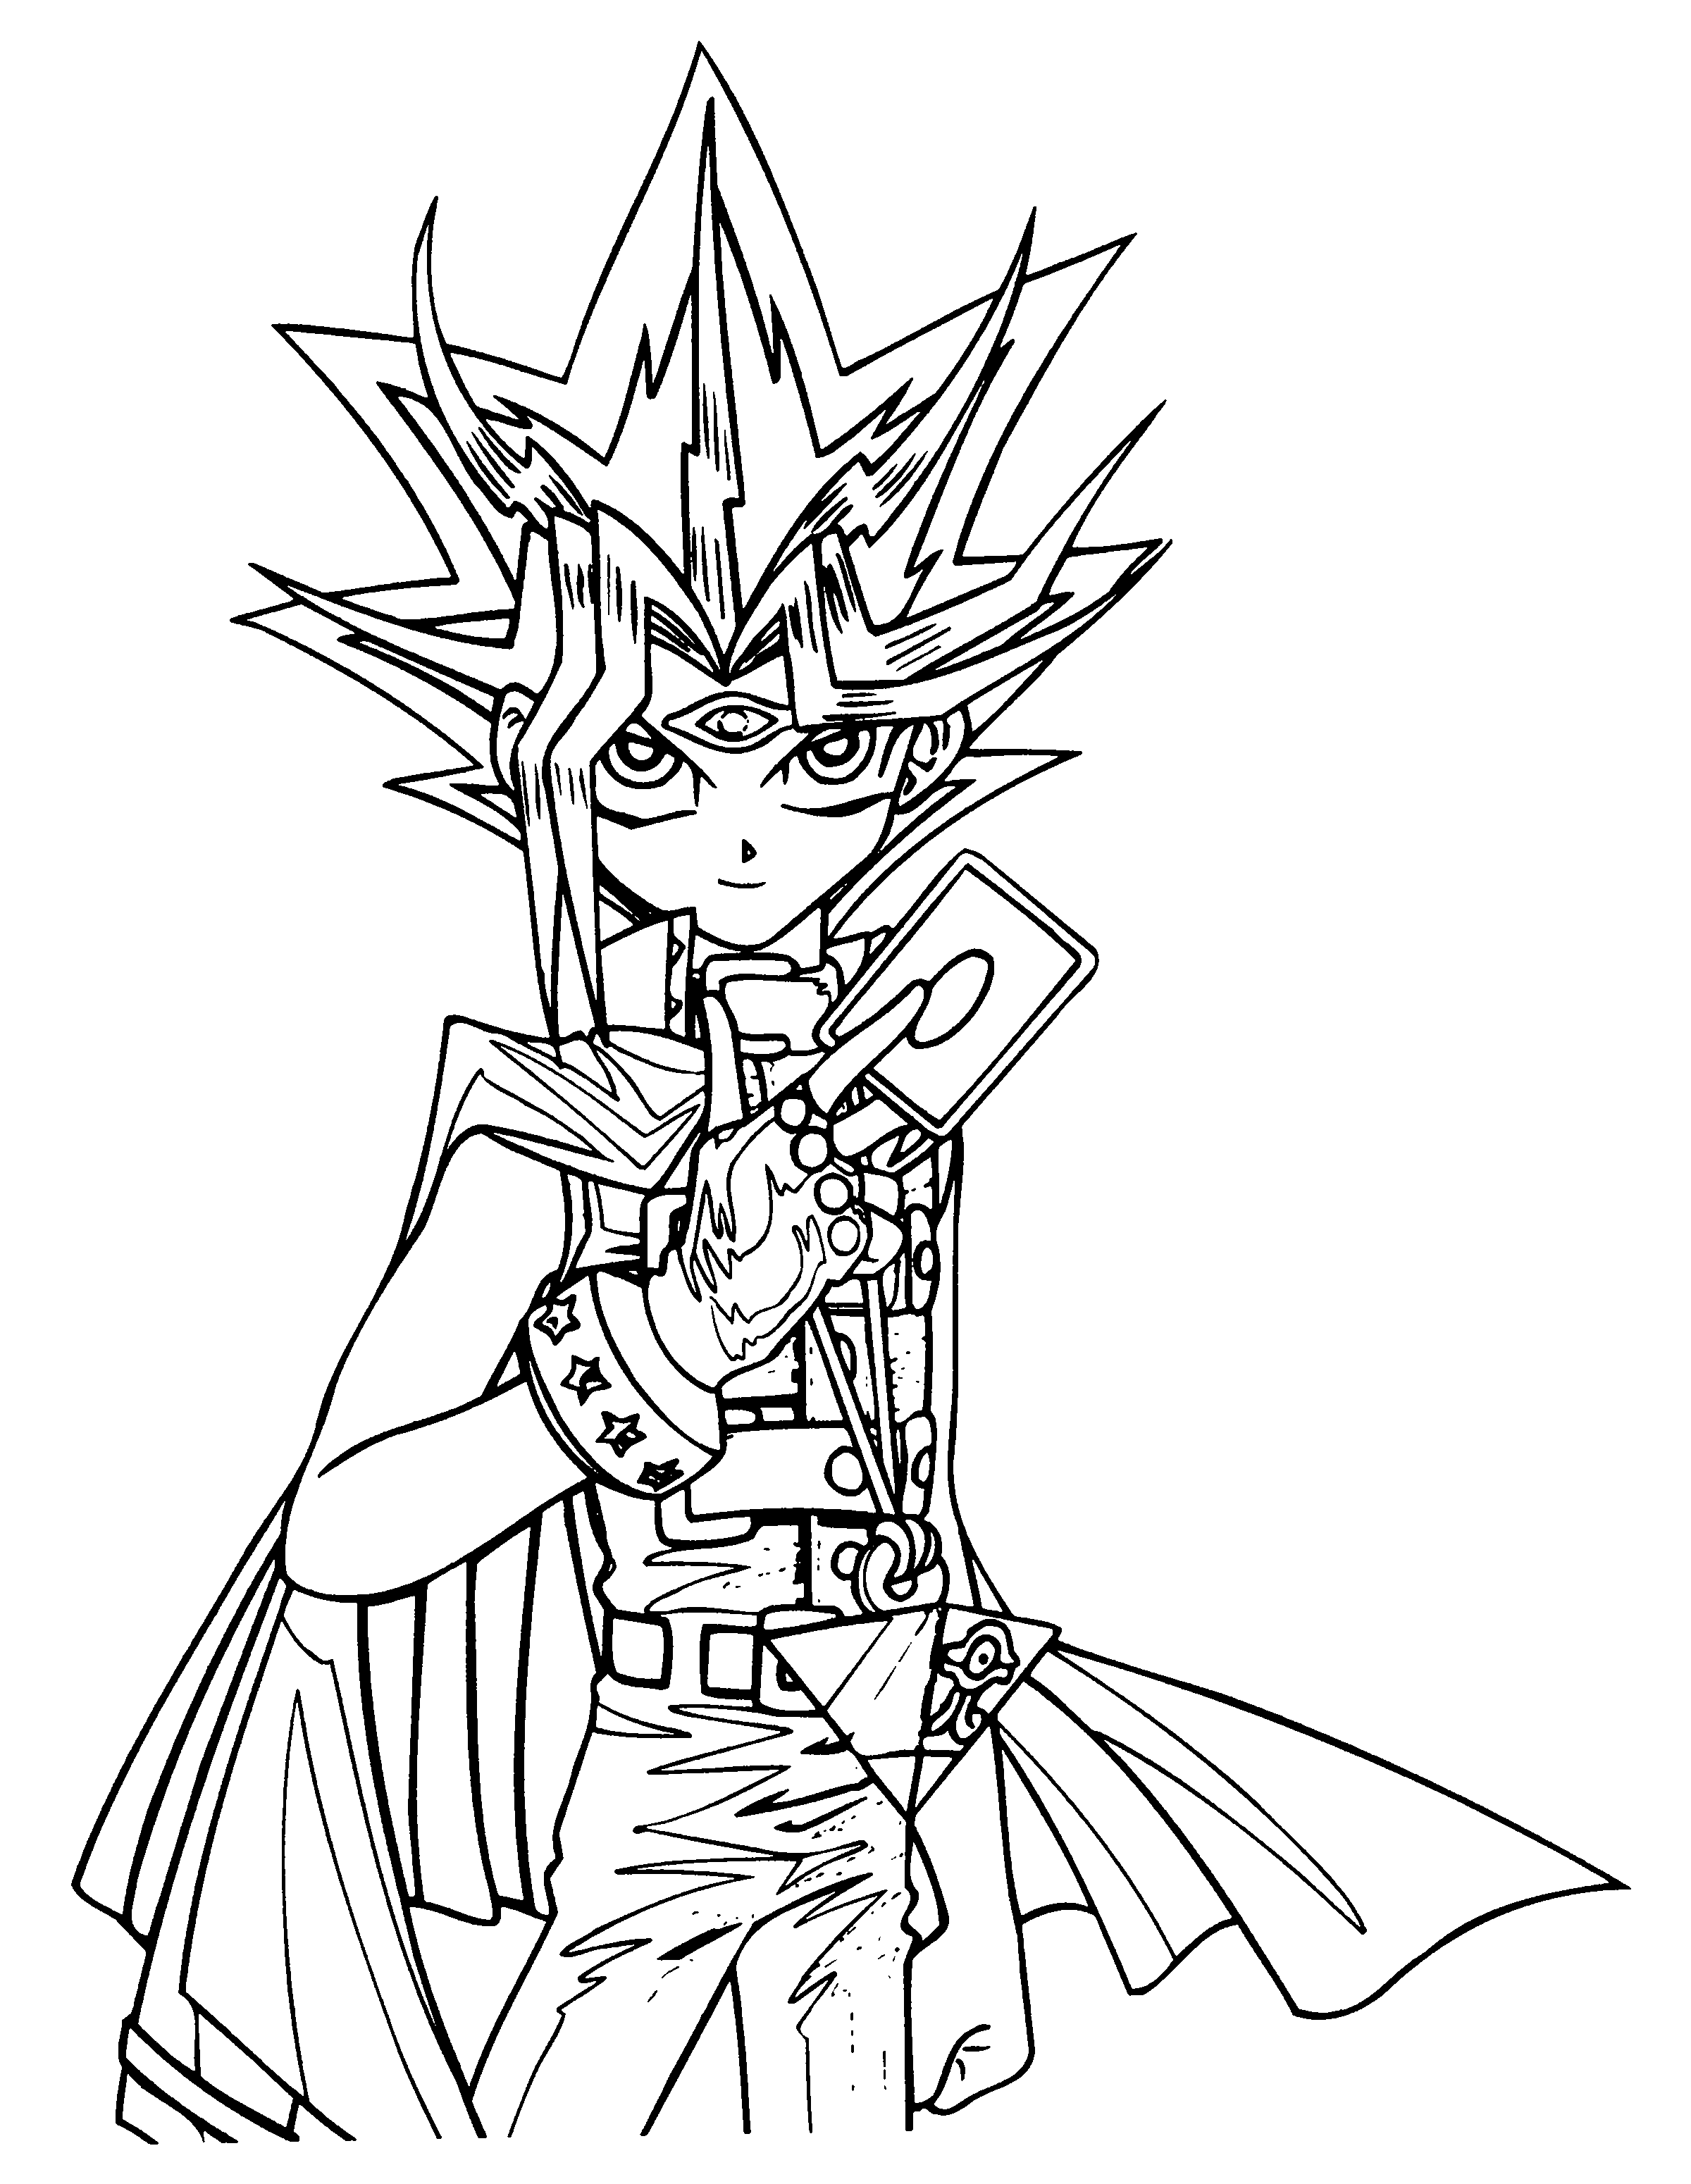 Yu Gi Oh Coloring Page Monster Coloring Pages Cartoon Coloring Pages Pokemon Coloring